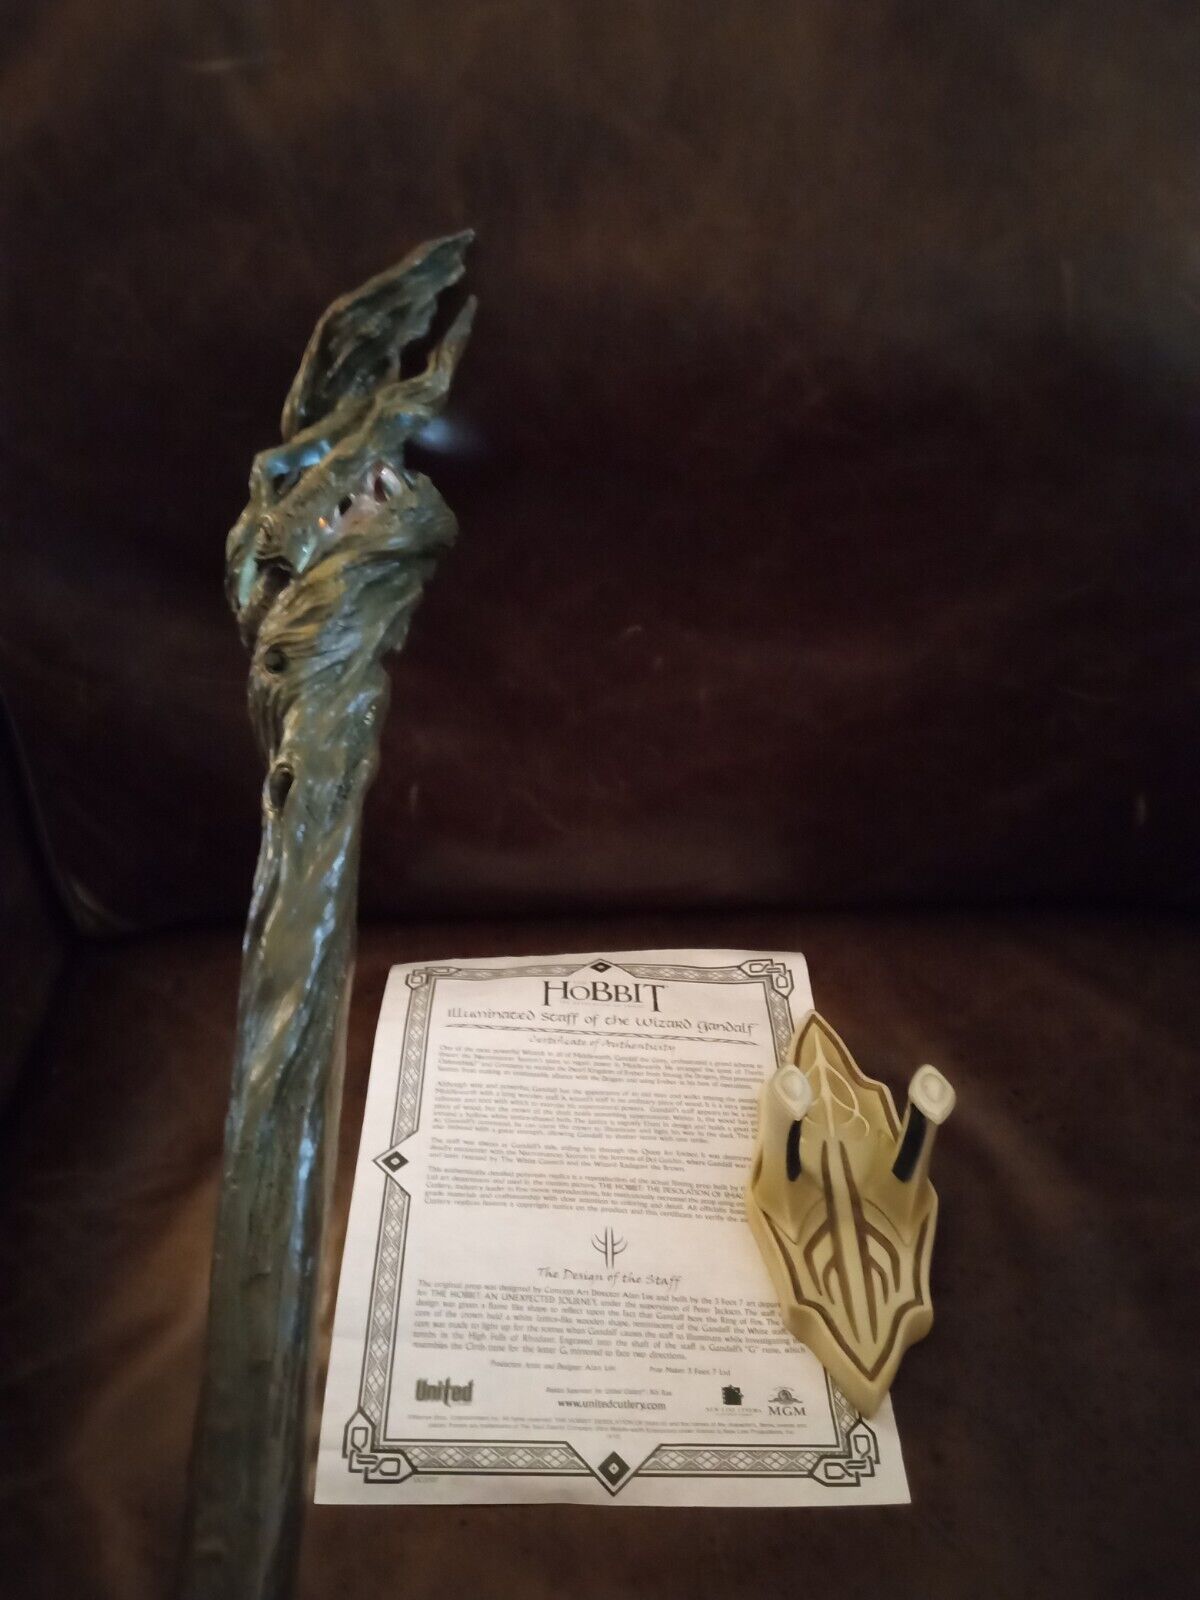 The Hobbit Lord of the rings staff of gandalf the Grey united cutlery